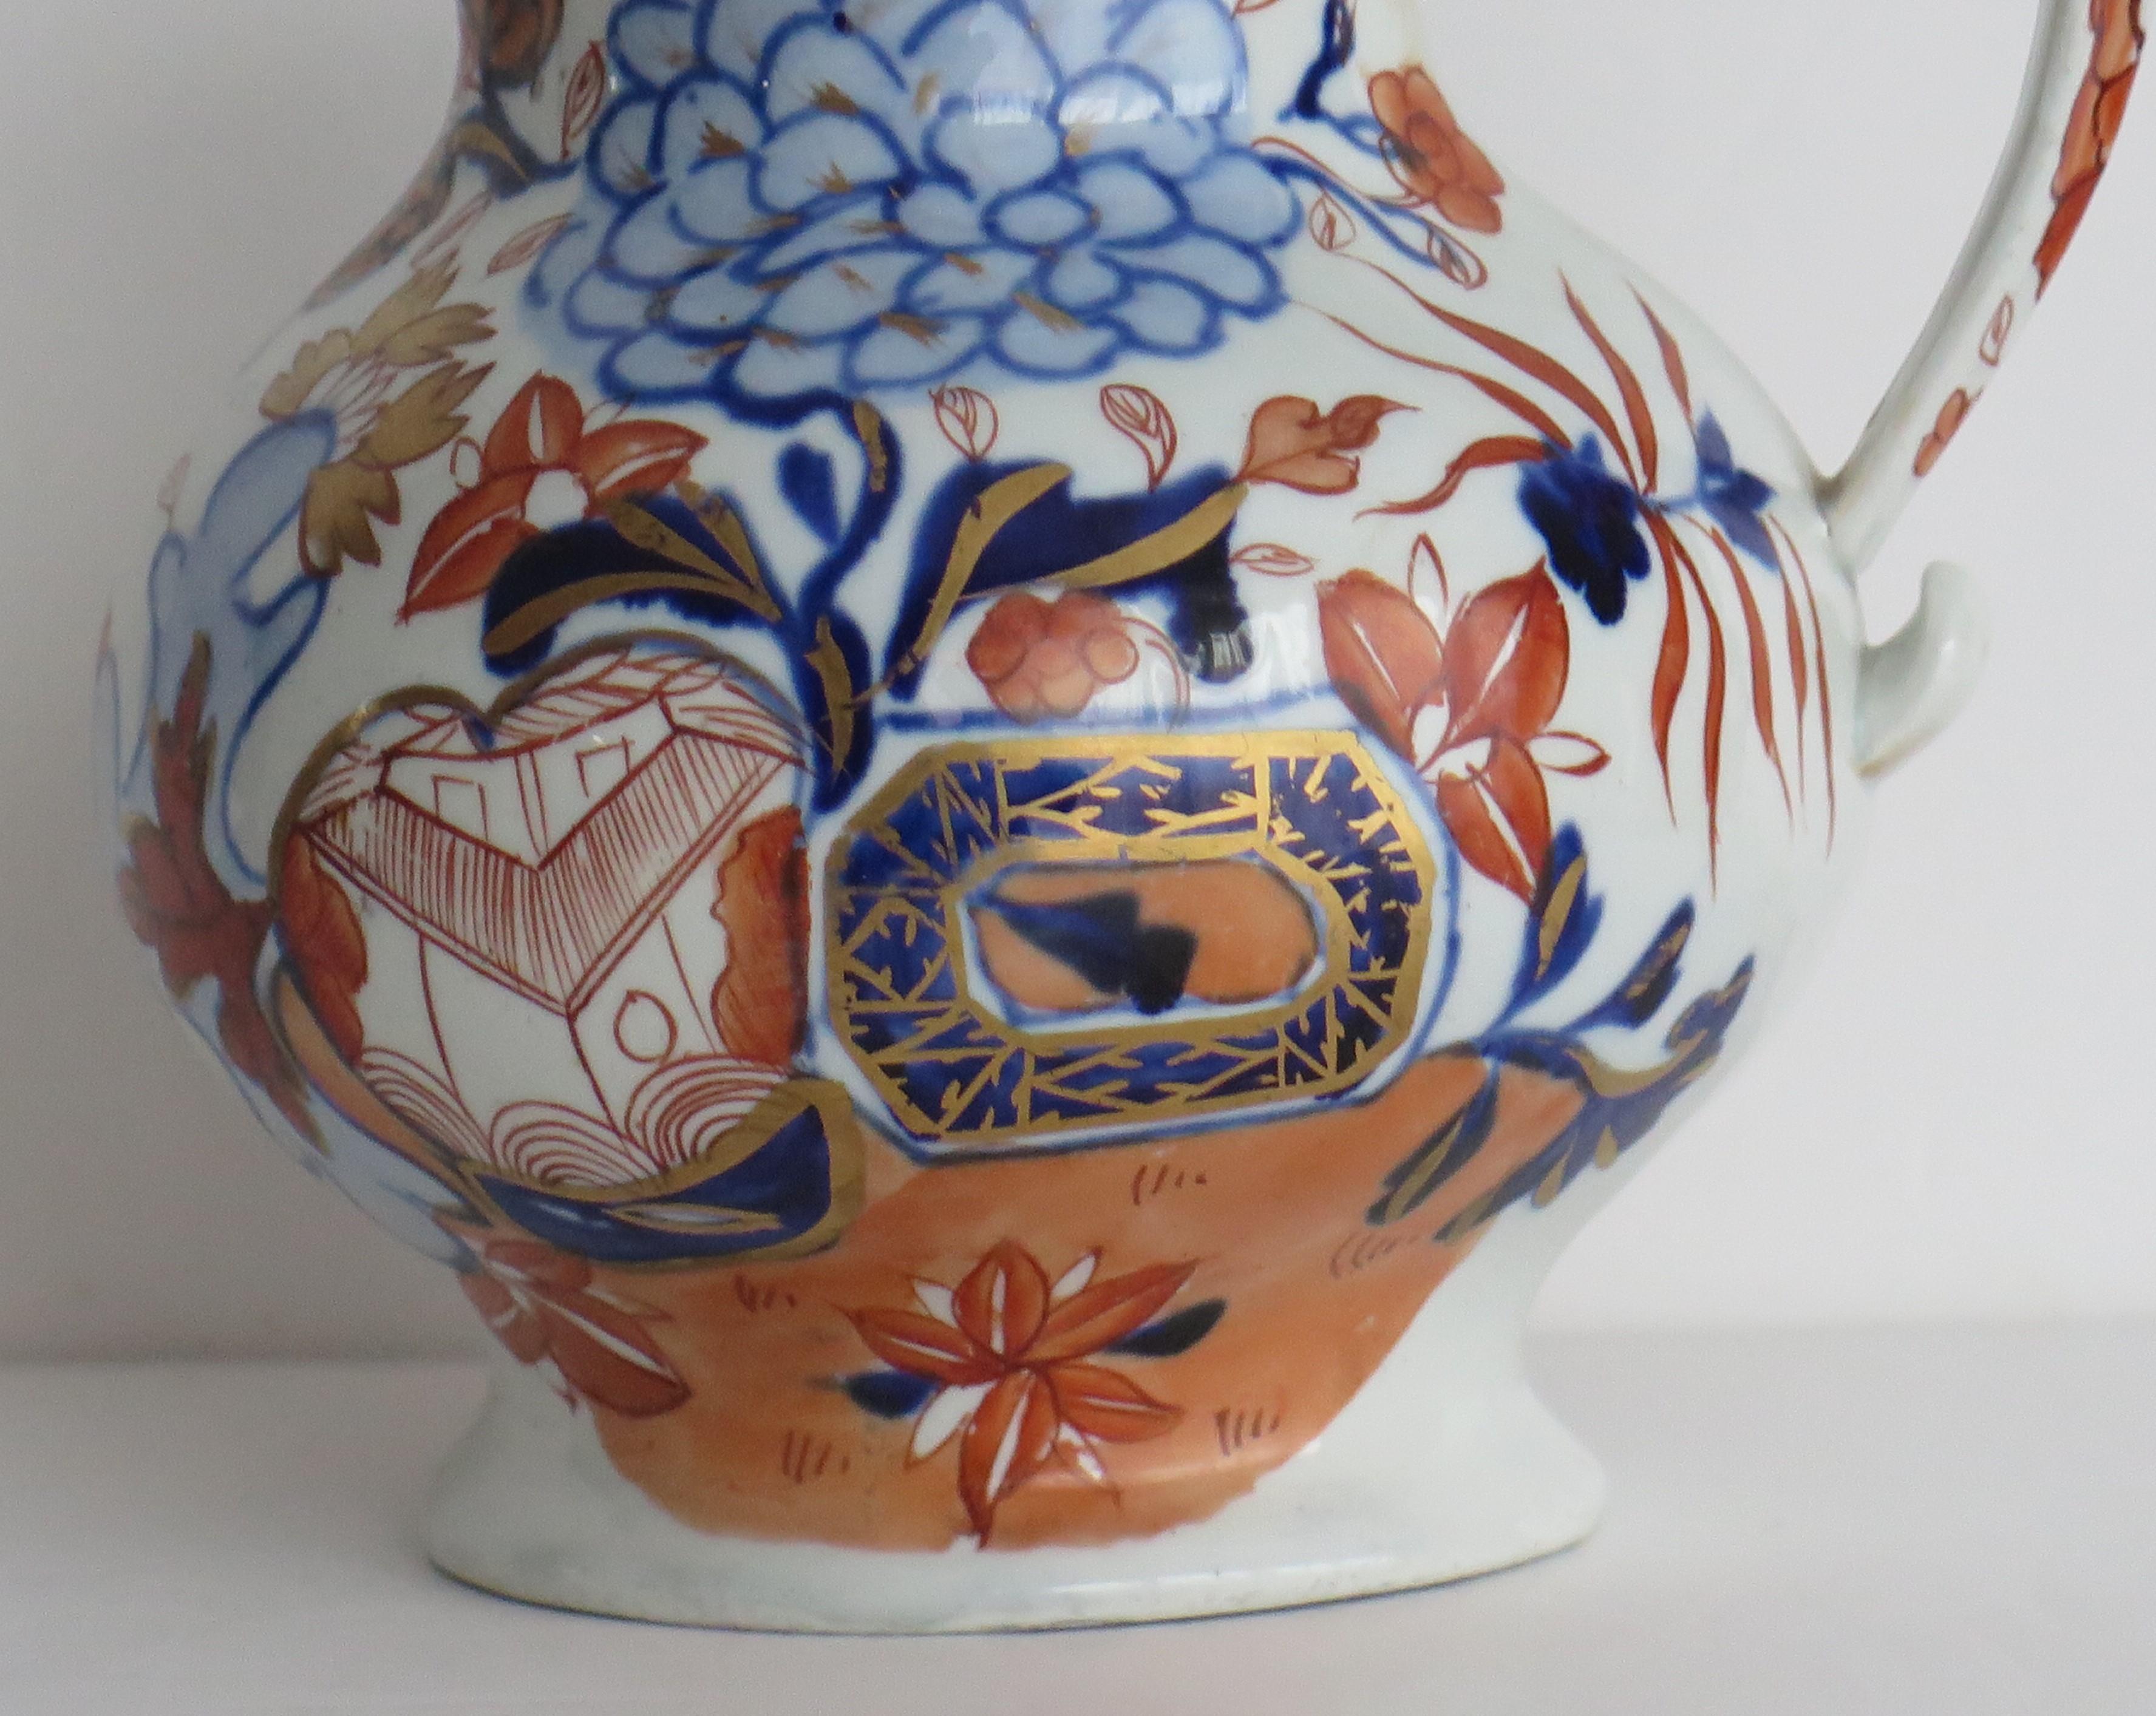 This is a rare early Jug or Pitcher in a rare shape, hand painted in the Jardiniere pattern, made by Mason's Ironstone, Lane Delph, England and dating to circa 1818.

The pattern is hand painted with typical bold free flowing enamels of cobalt